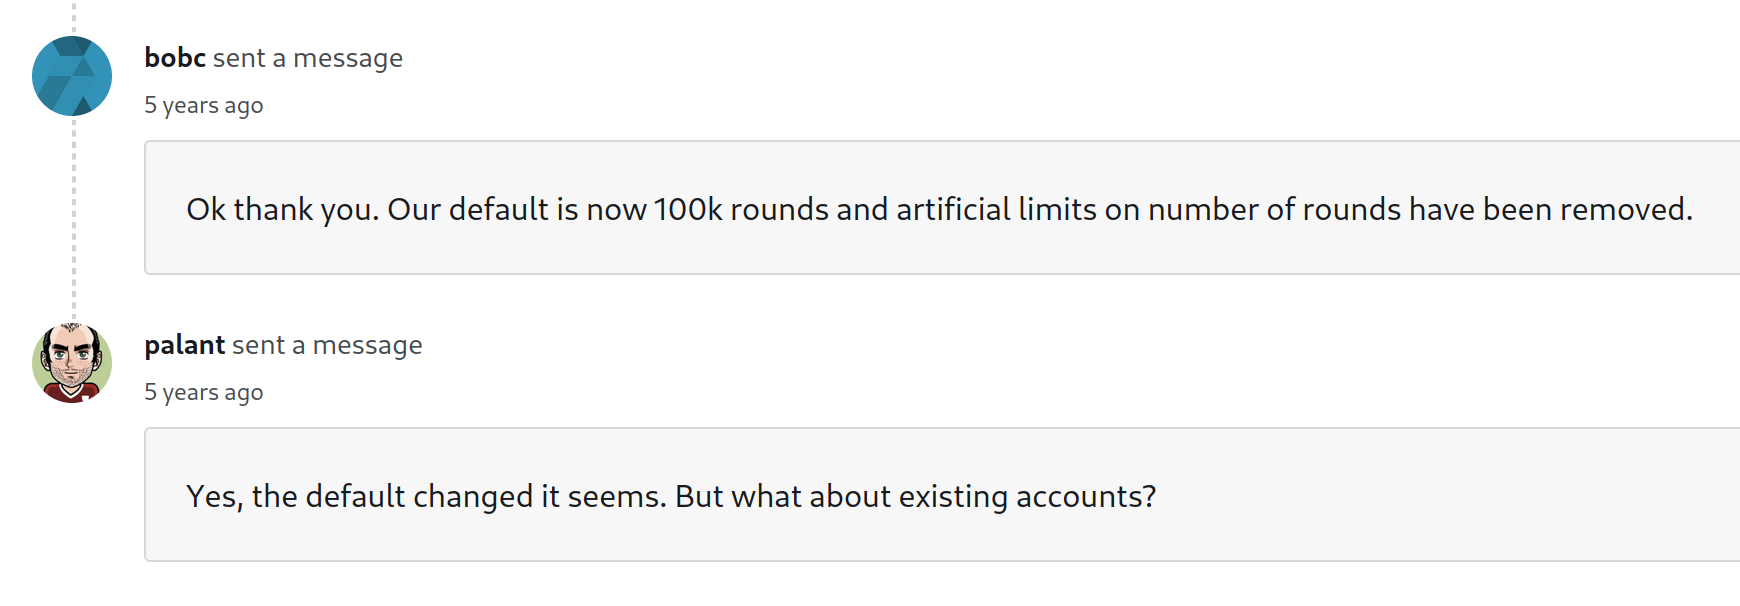 Screenshot from Bugcrowd. bobc sent a message (5 years ago): Ok thank you. Our default is now 100k rounds and artificial limits on number of rounds have been removed. palant sent a message (5 years ago) Yes, the default changed it seems. But what about existing accounts?